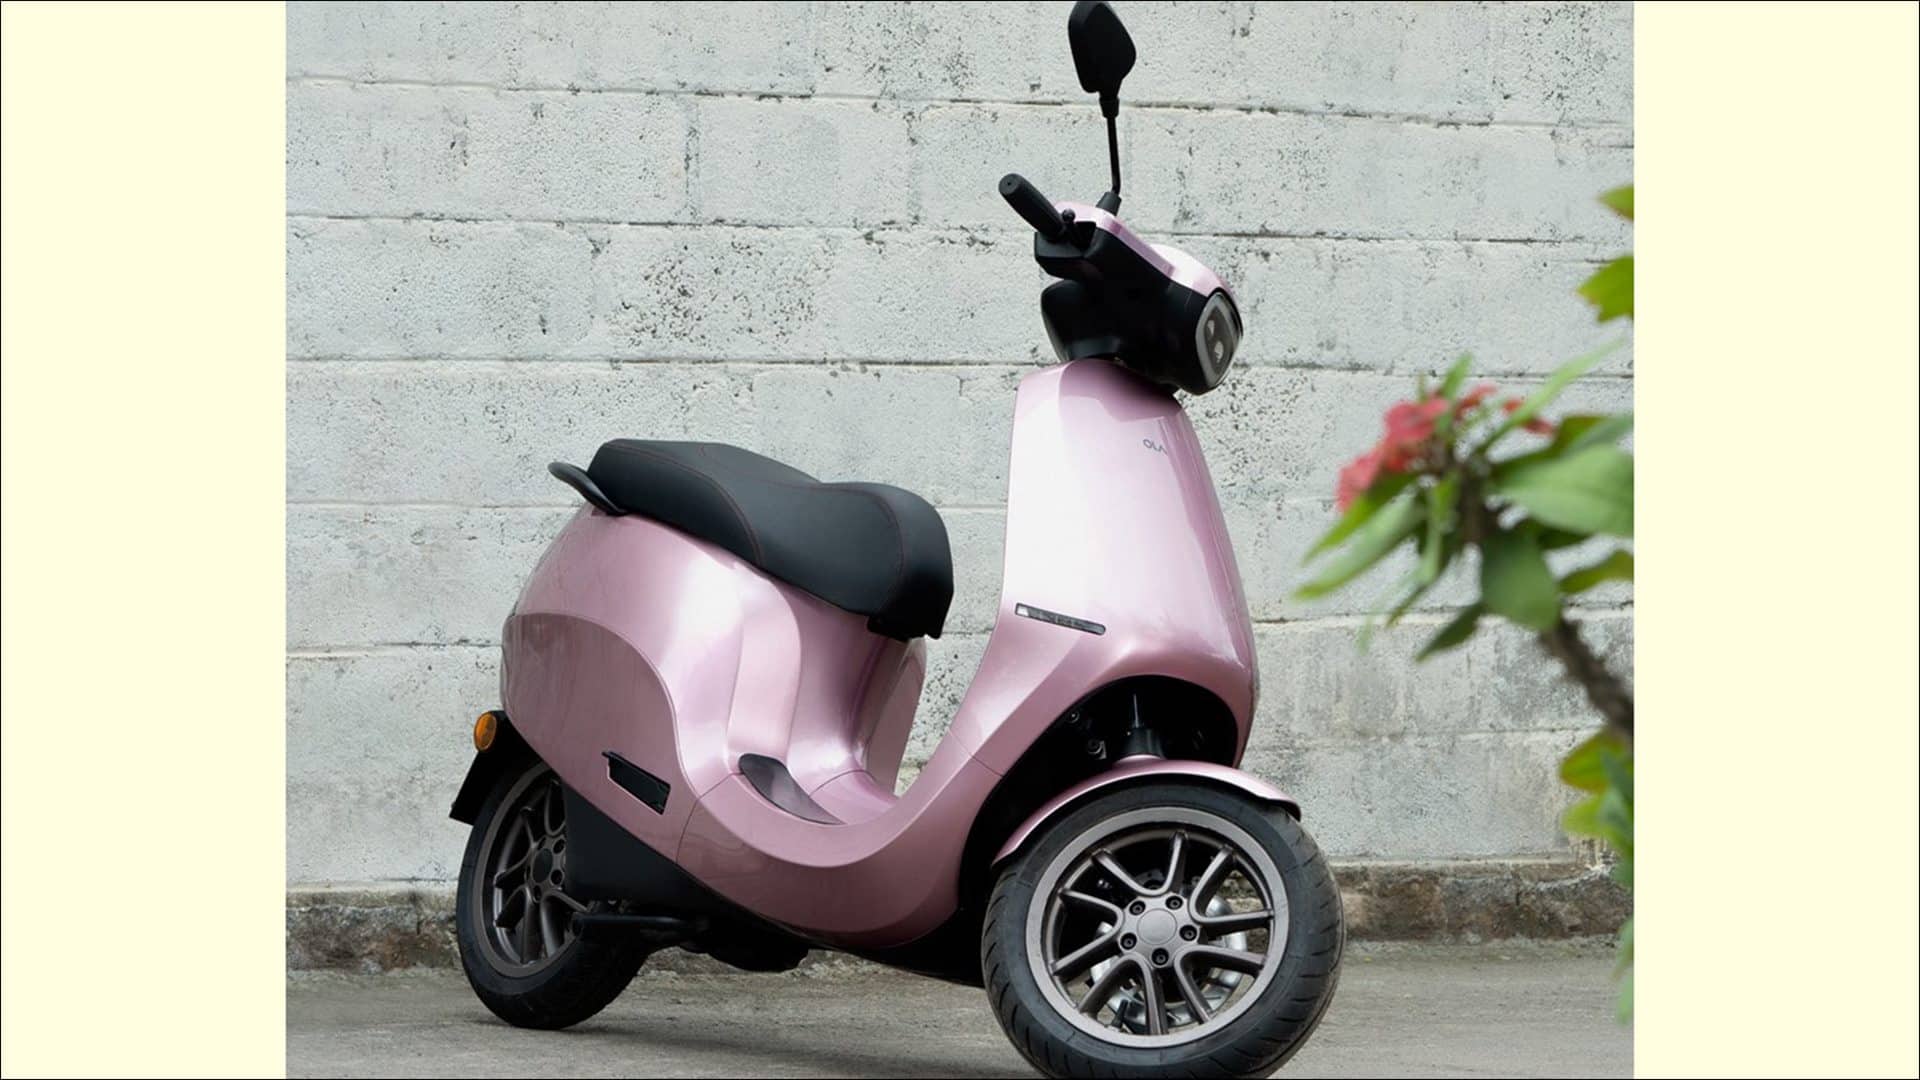 Ola Electric scooter to be launched on August 15. Here's what we know so far